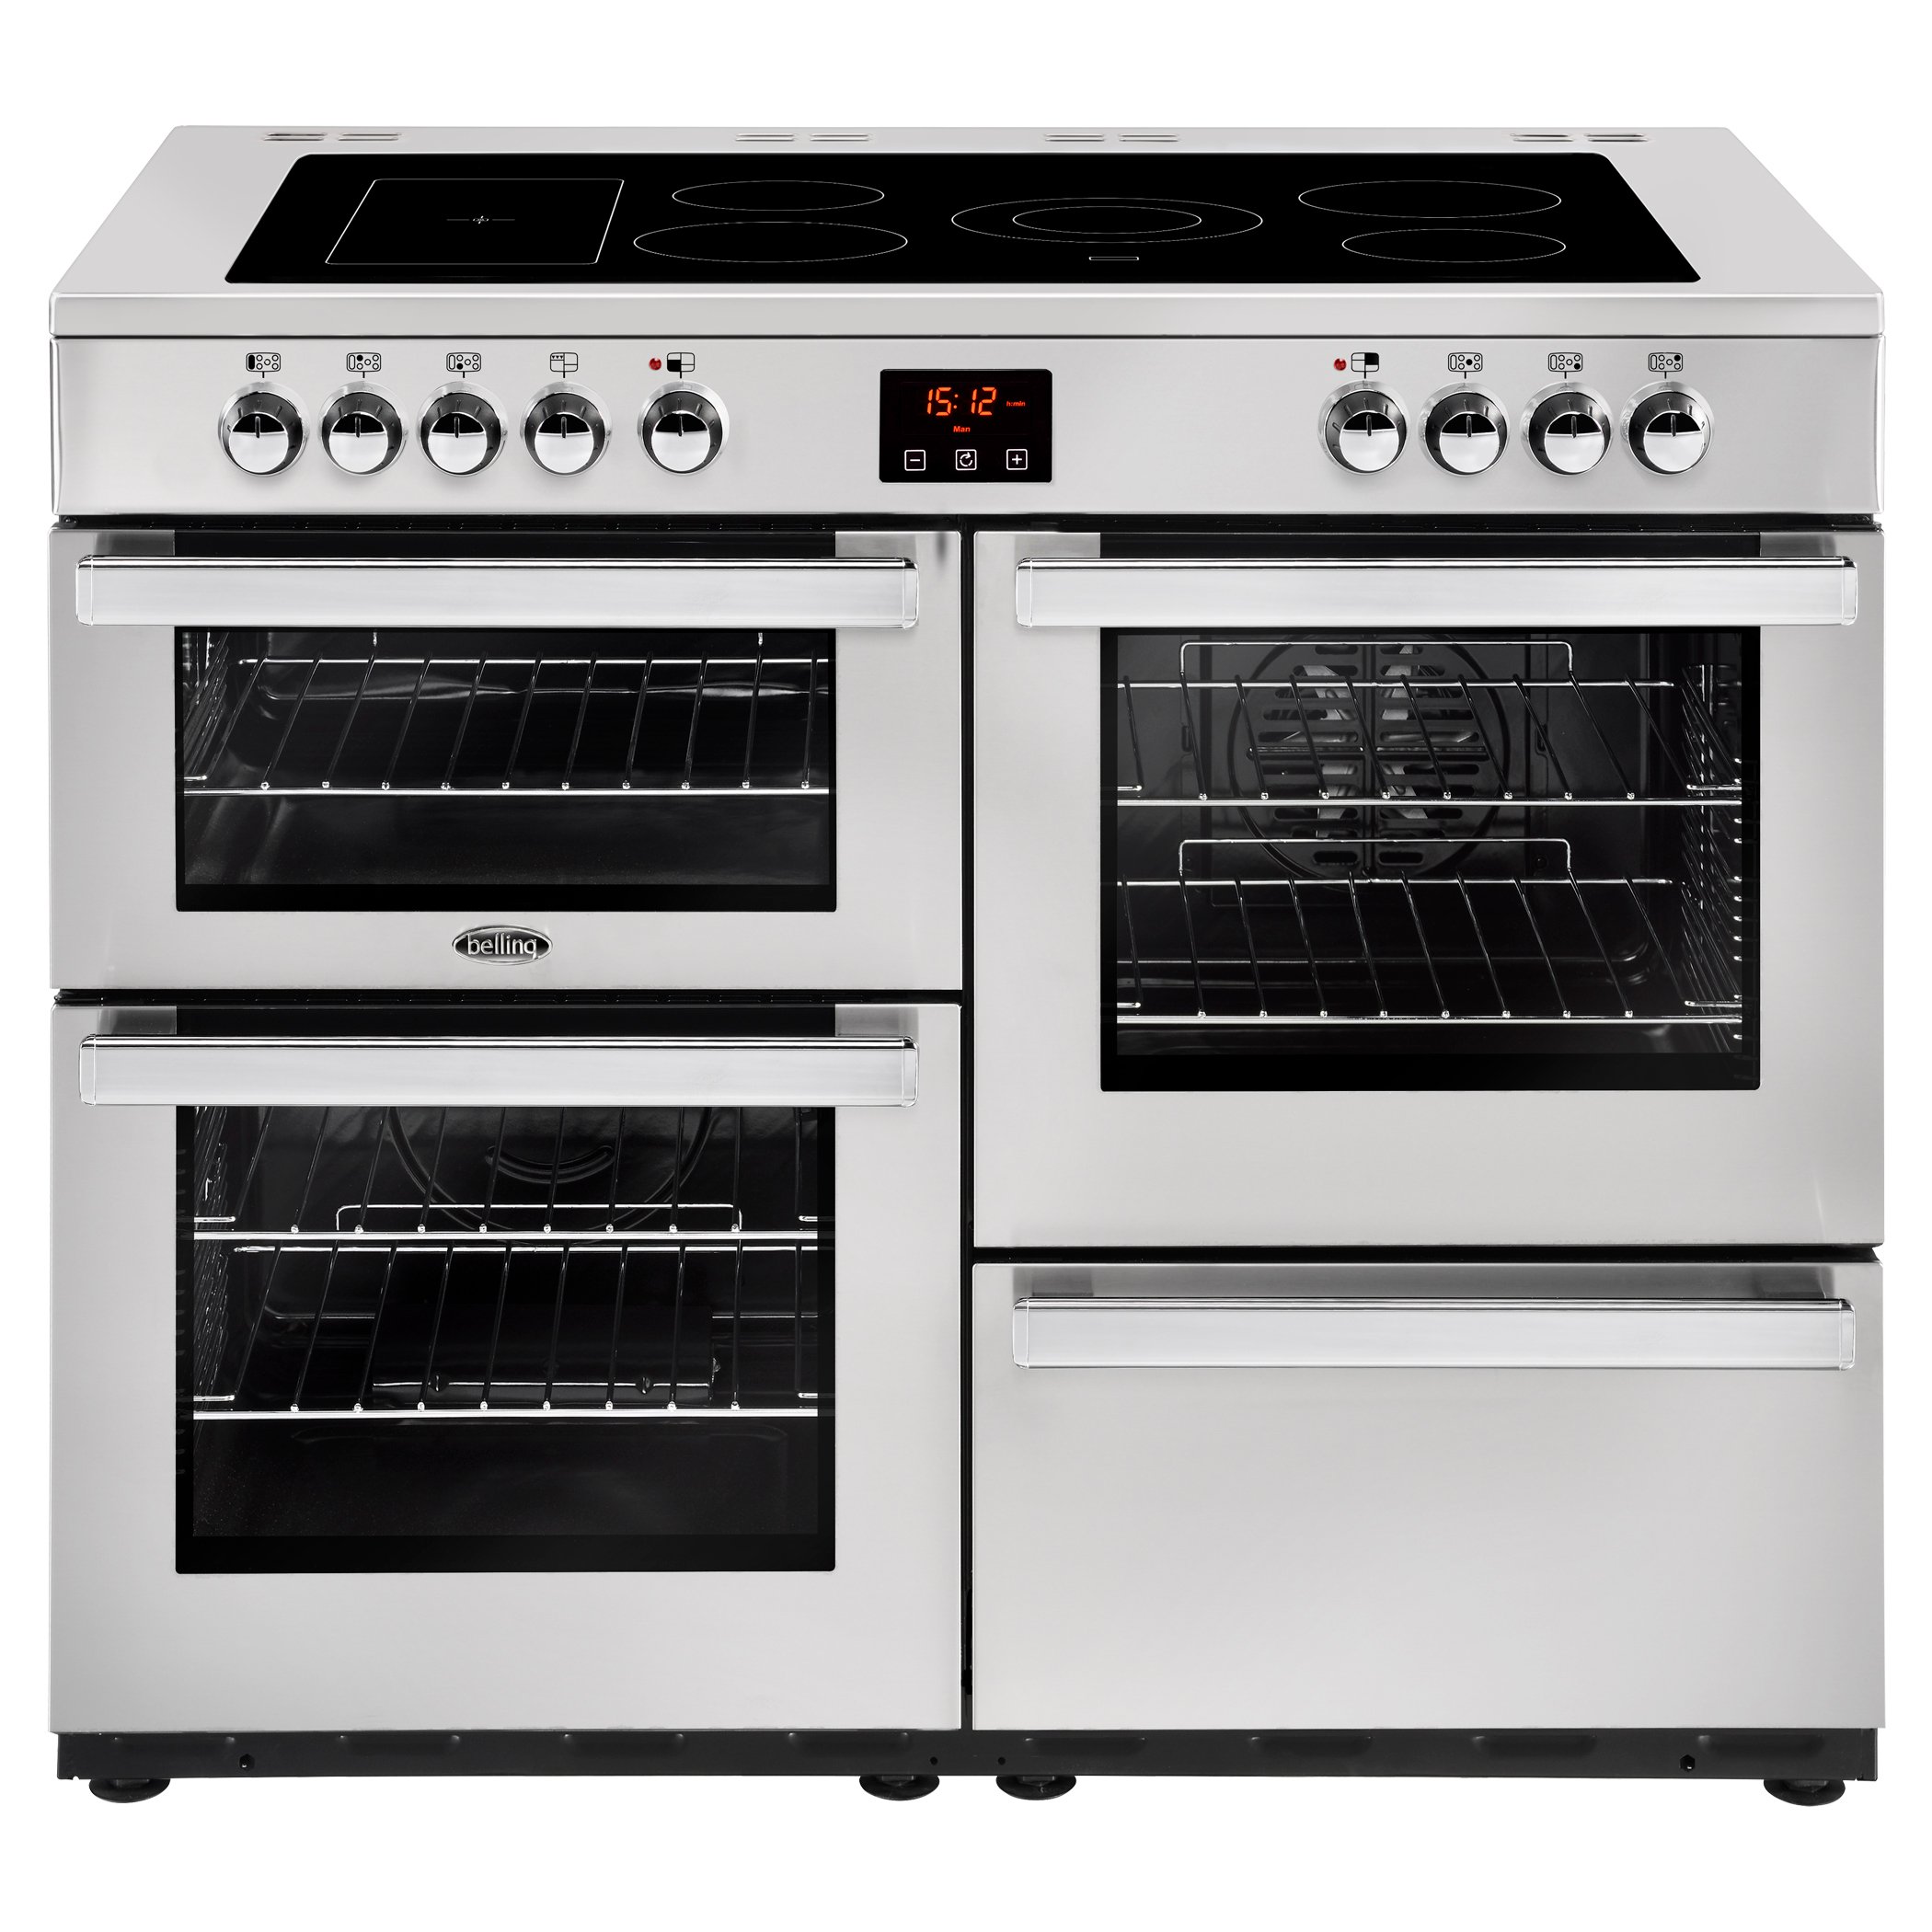 110cm electric range cooker with 5 zone ceramic hotplate plus warming zone, Maxi-Clock and easy clean enamel.